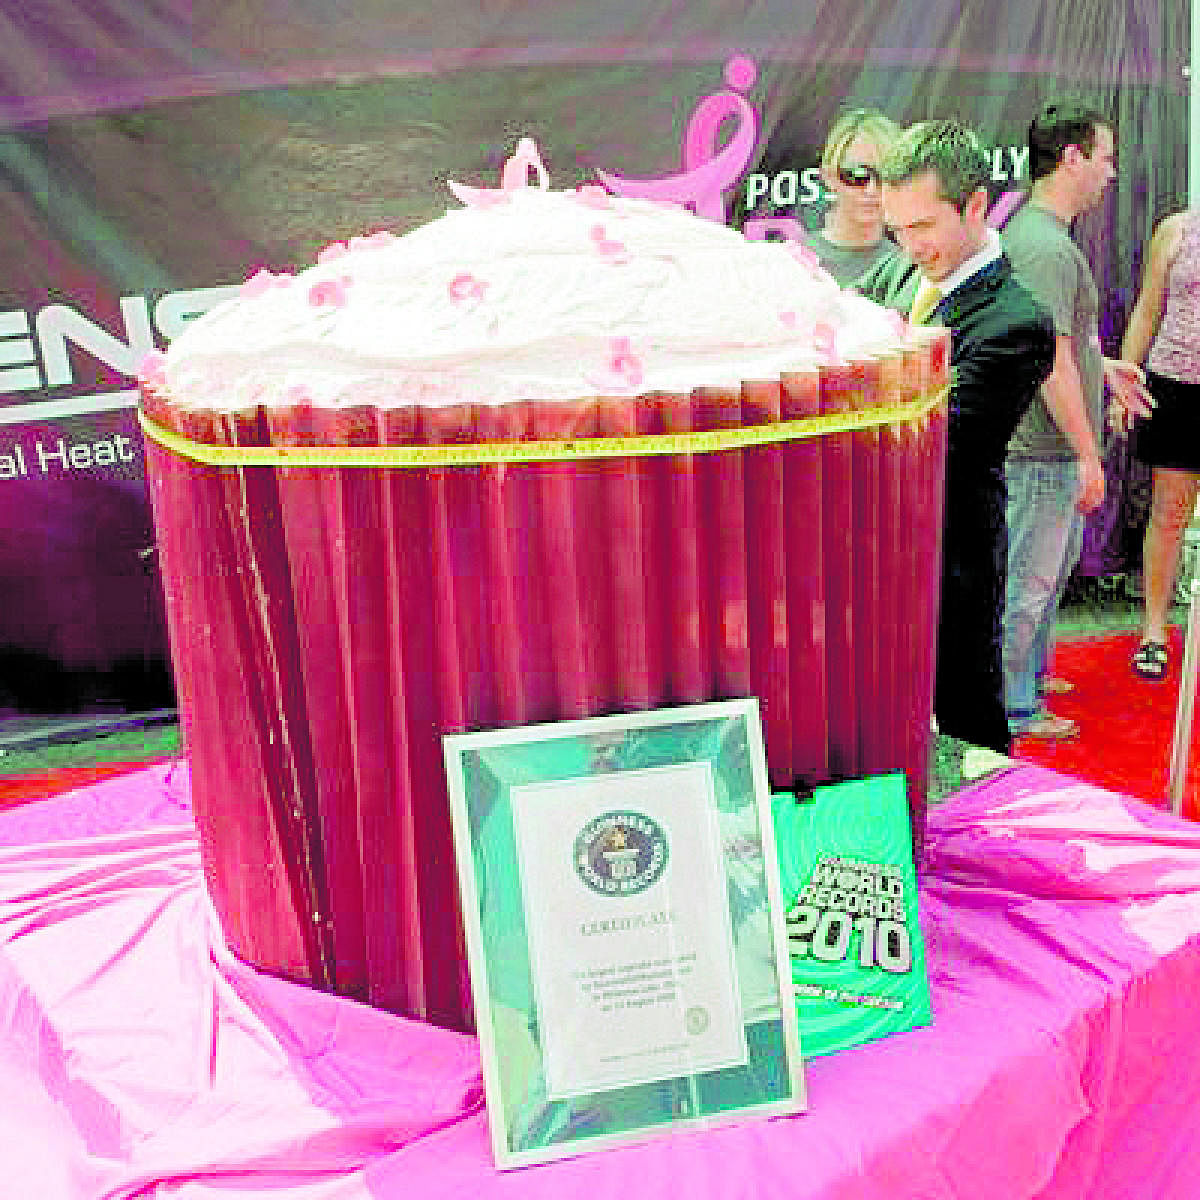 The cupcake, weighing 1,176.6 kg, by Georgetown Cupcake (USA), which holds the Guinness World Record at present.